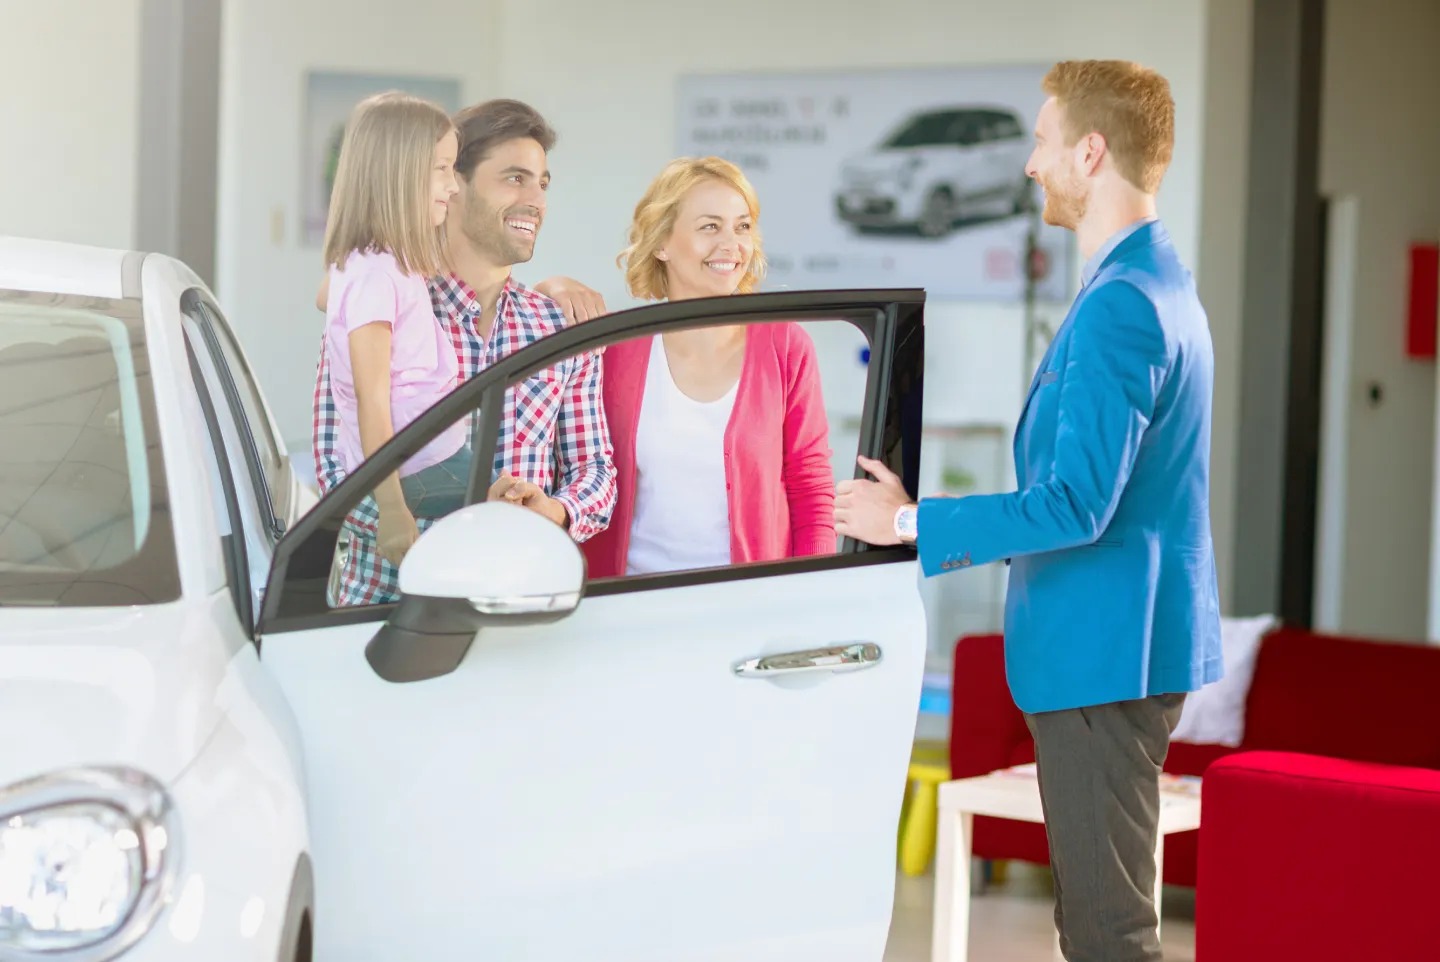 What Dealerships Work With Bad Credit